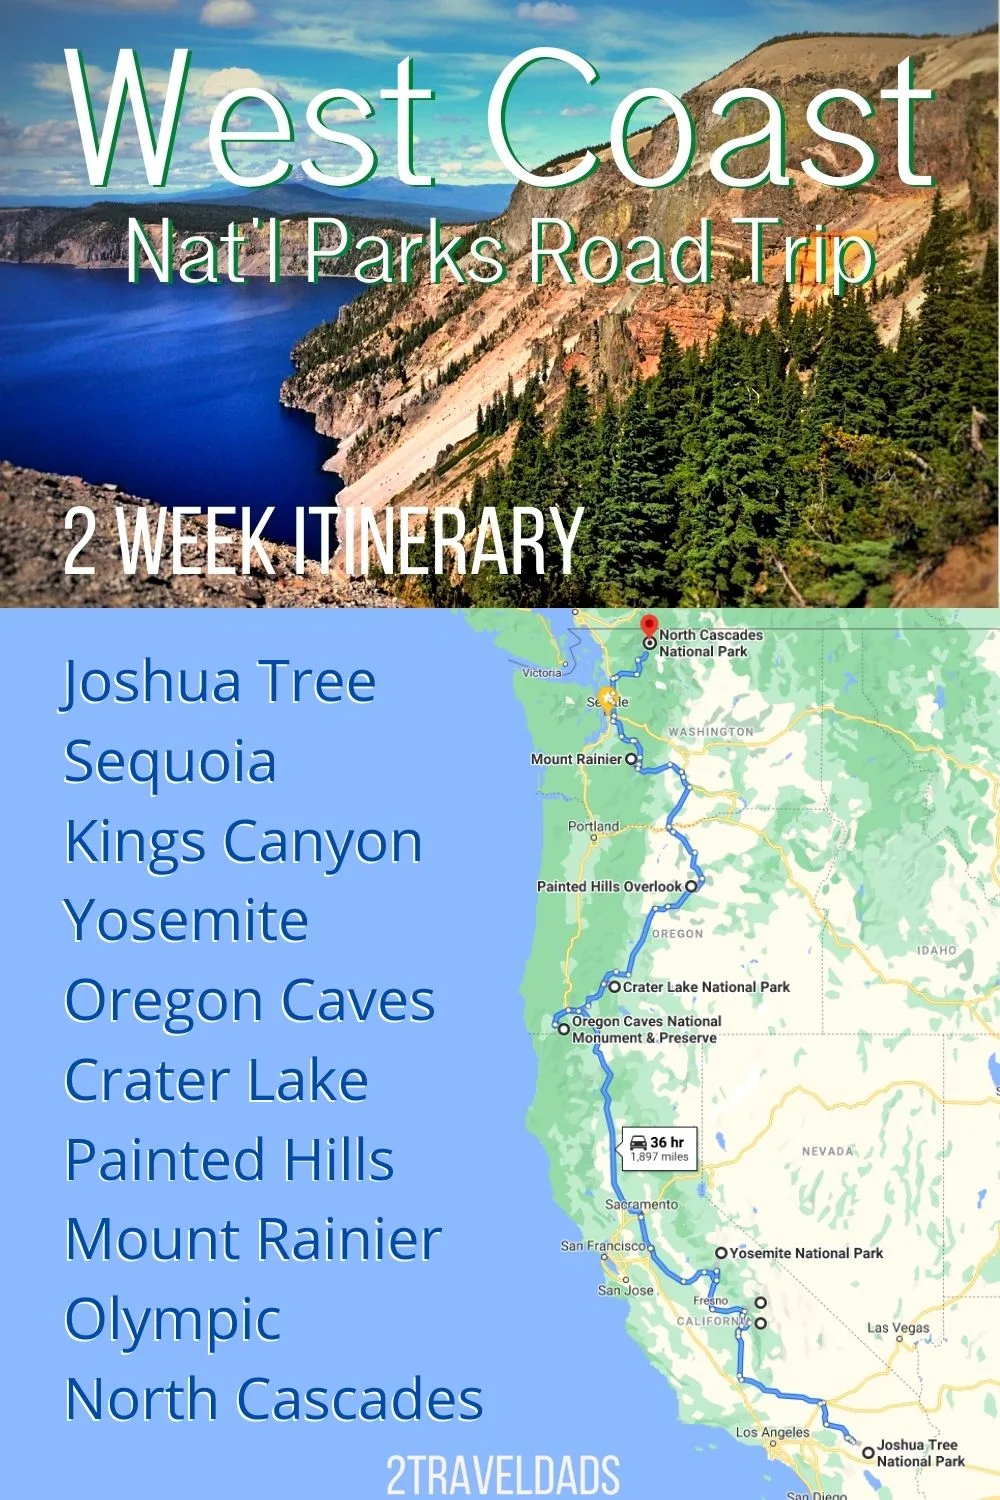 Perfect West Coast National Parks road trip plan, from Joshua Tree to Olympic National Park. Stops in the Sierras, Central Oregon, and the best of Washington State's mountains.